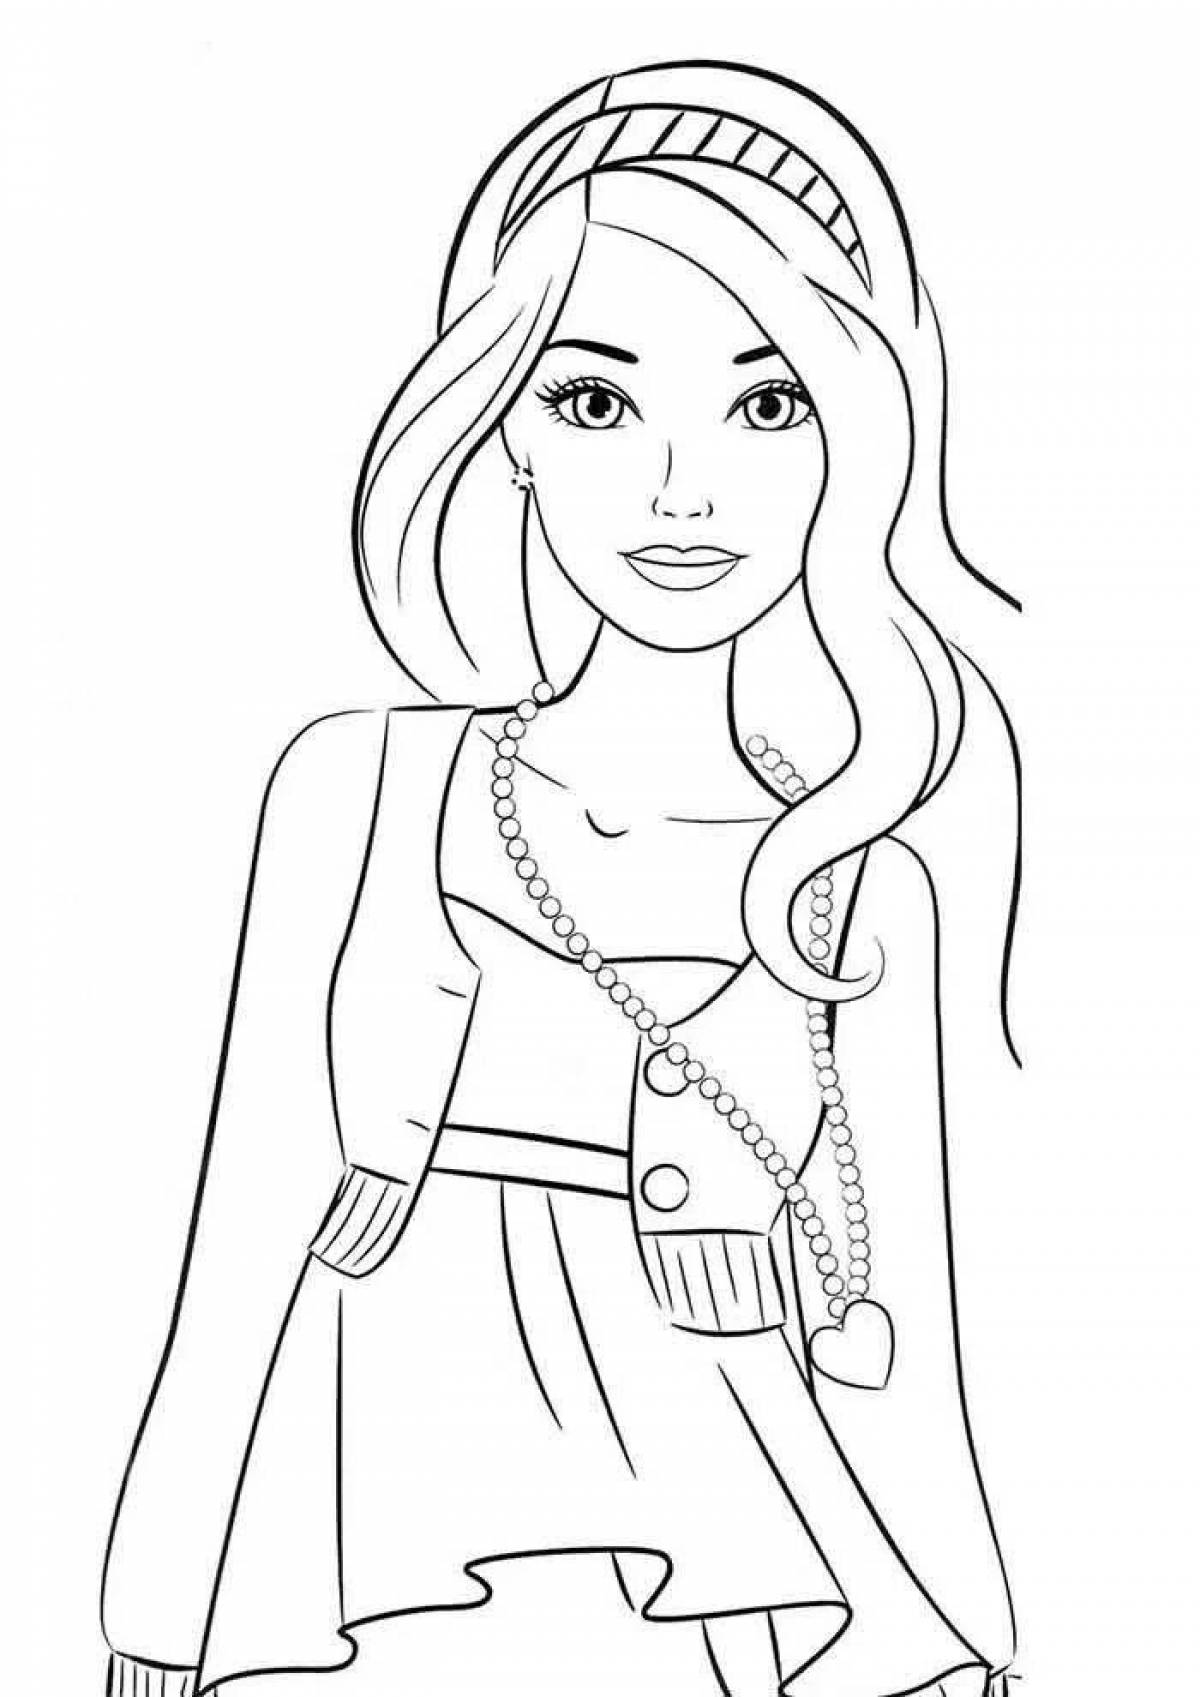 Great barbie face coloring page